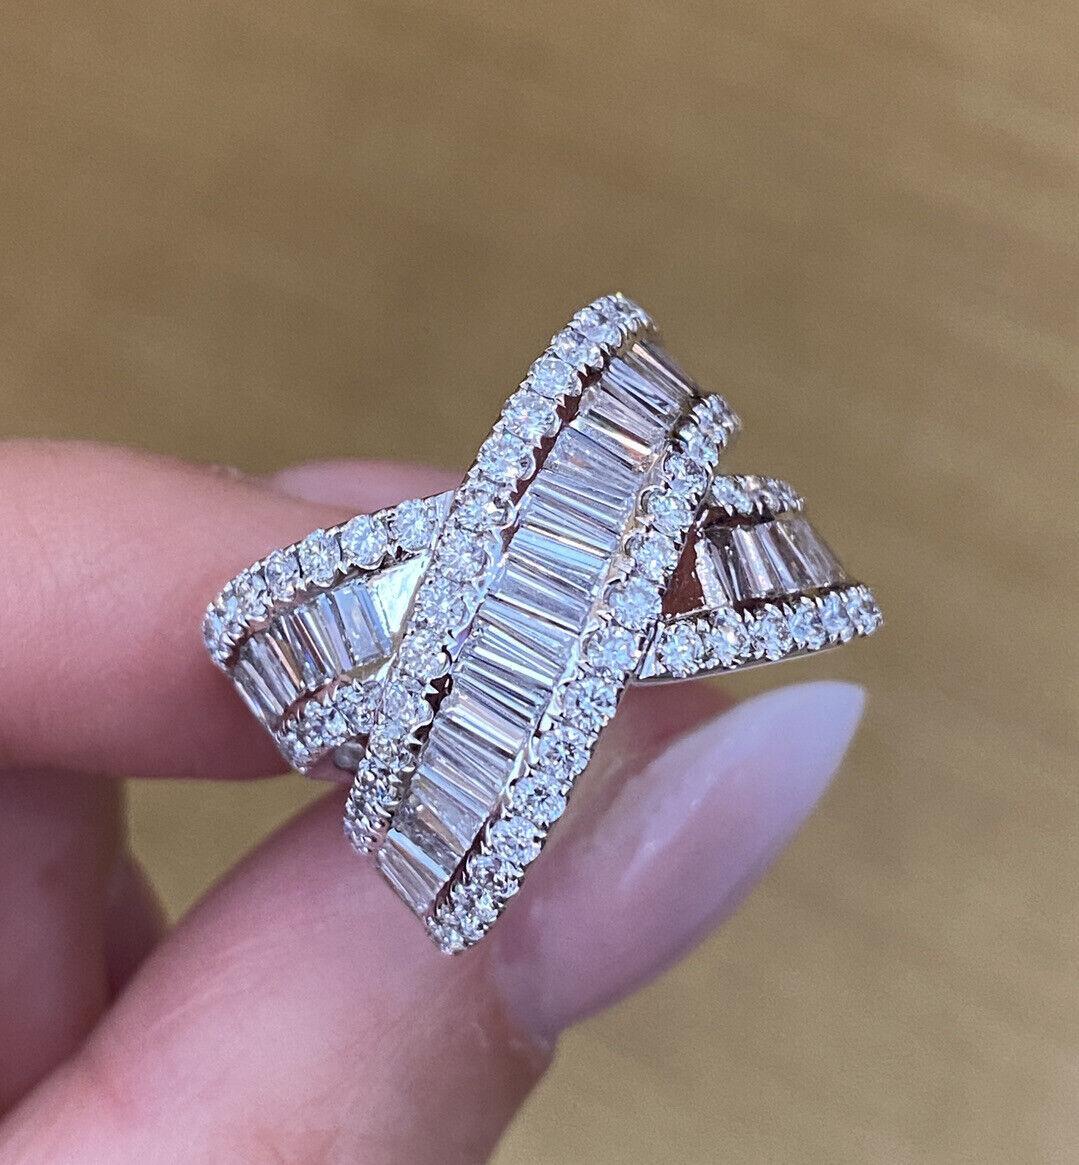 Wide Diamond Crossover Ring 3.48 Carat Total Weight in 18k White Gold

Diamond Crossover Ring features Tapered Baguette Diamonds and Round Brilliant Diamonds set in two bands that cross over each other set in 18k White Gold.

Baguette Diamonds weigh